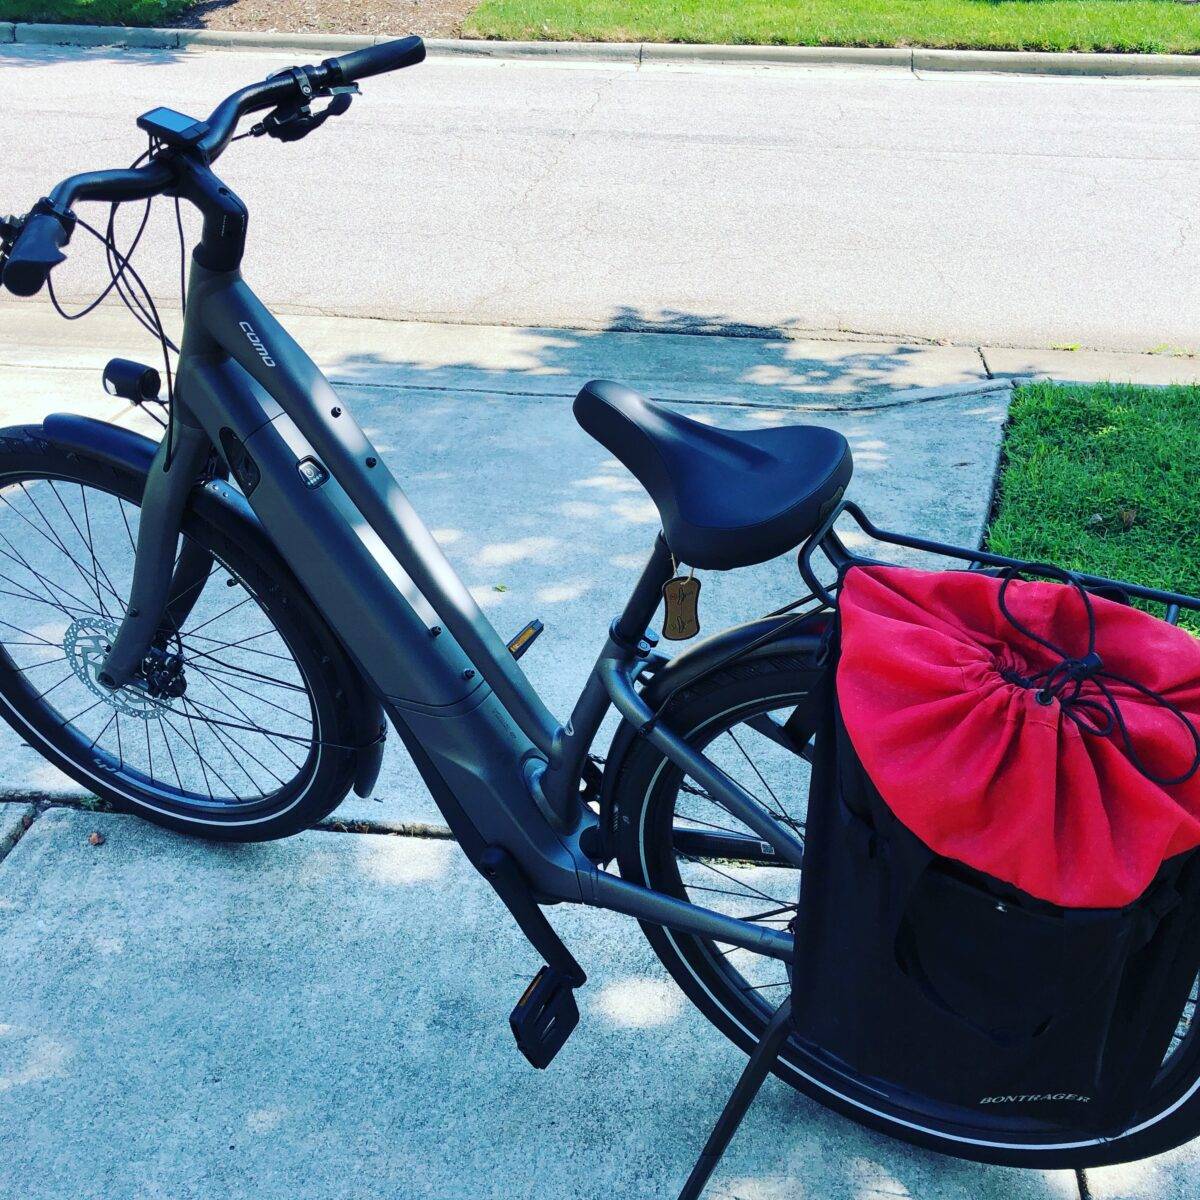 Photograph of an electric-assist bike